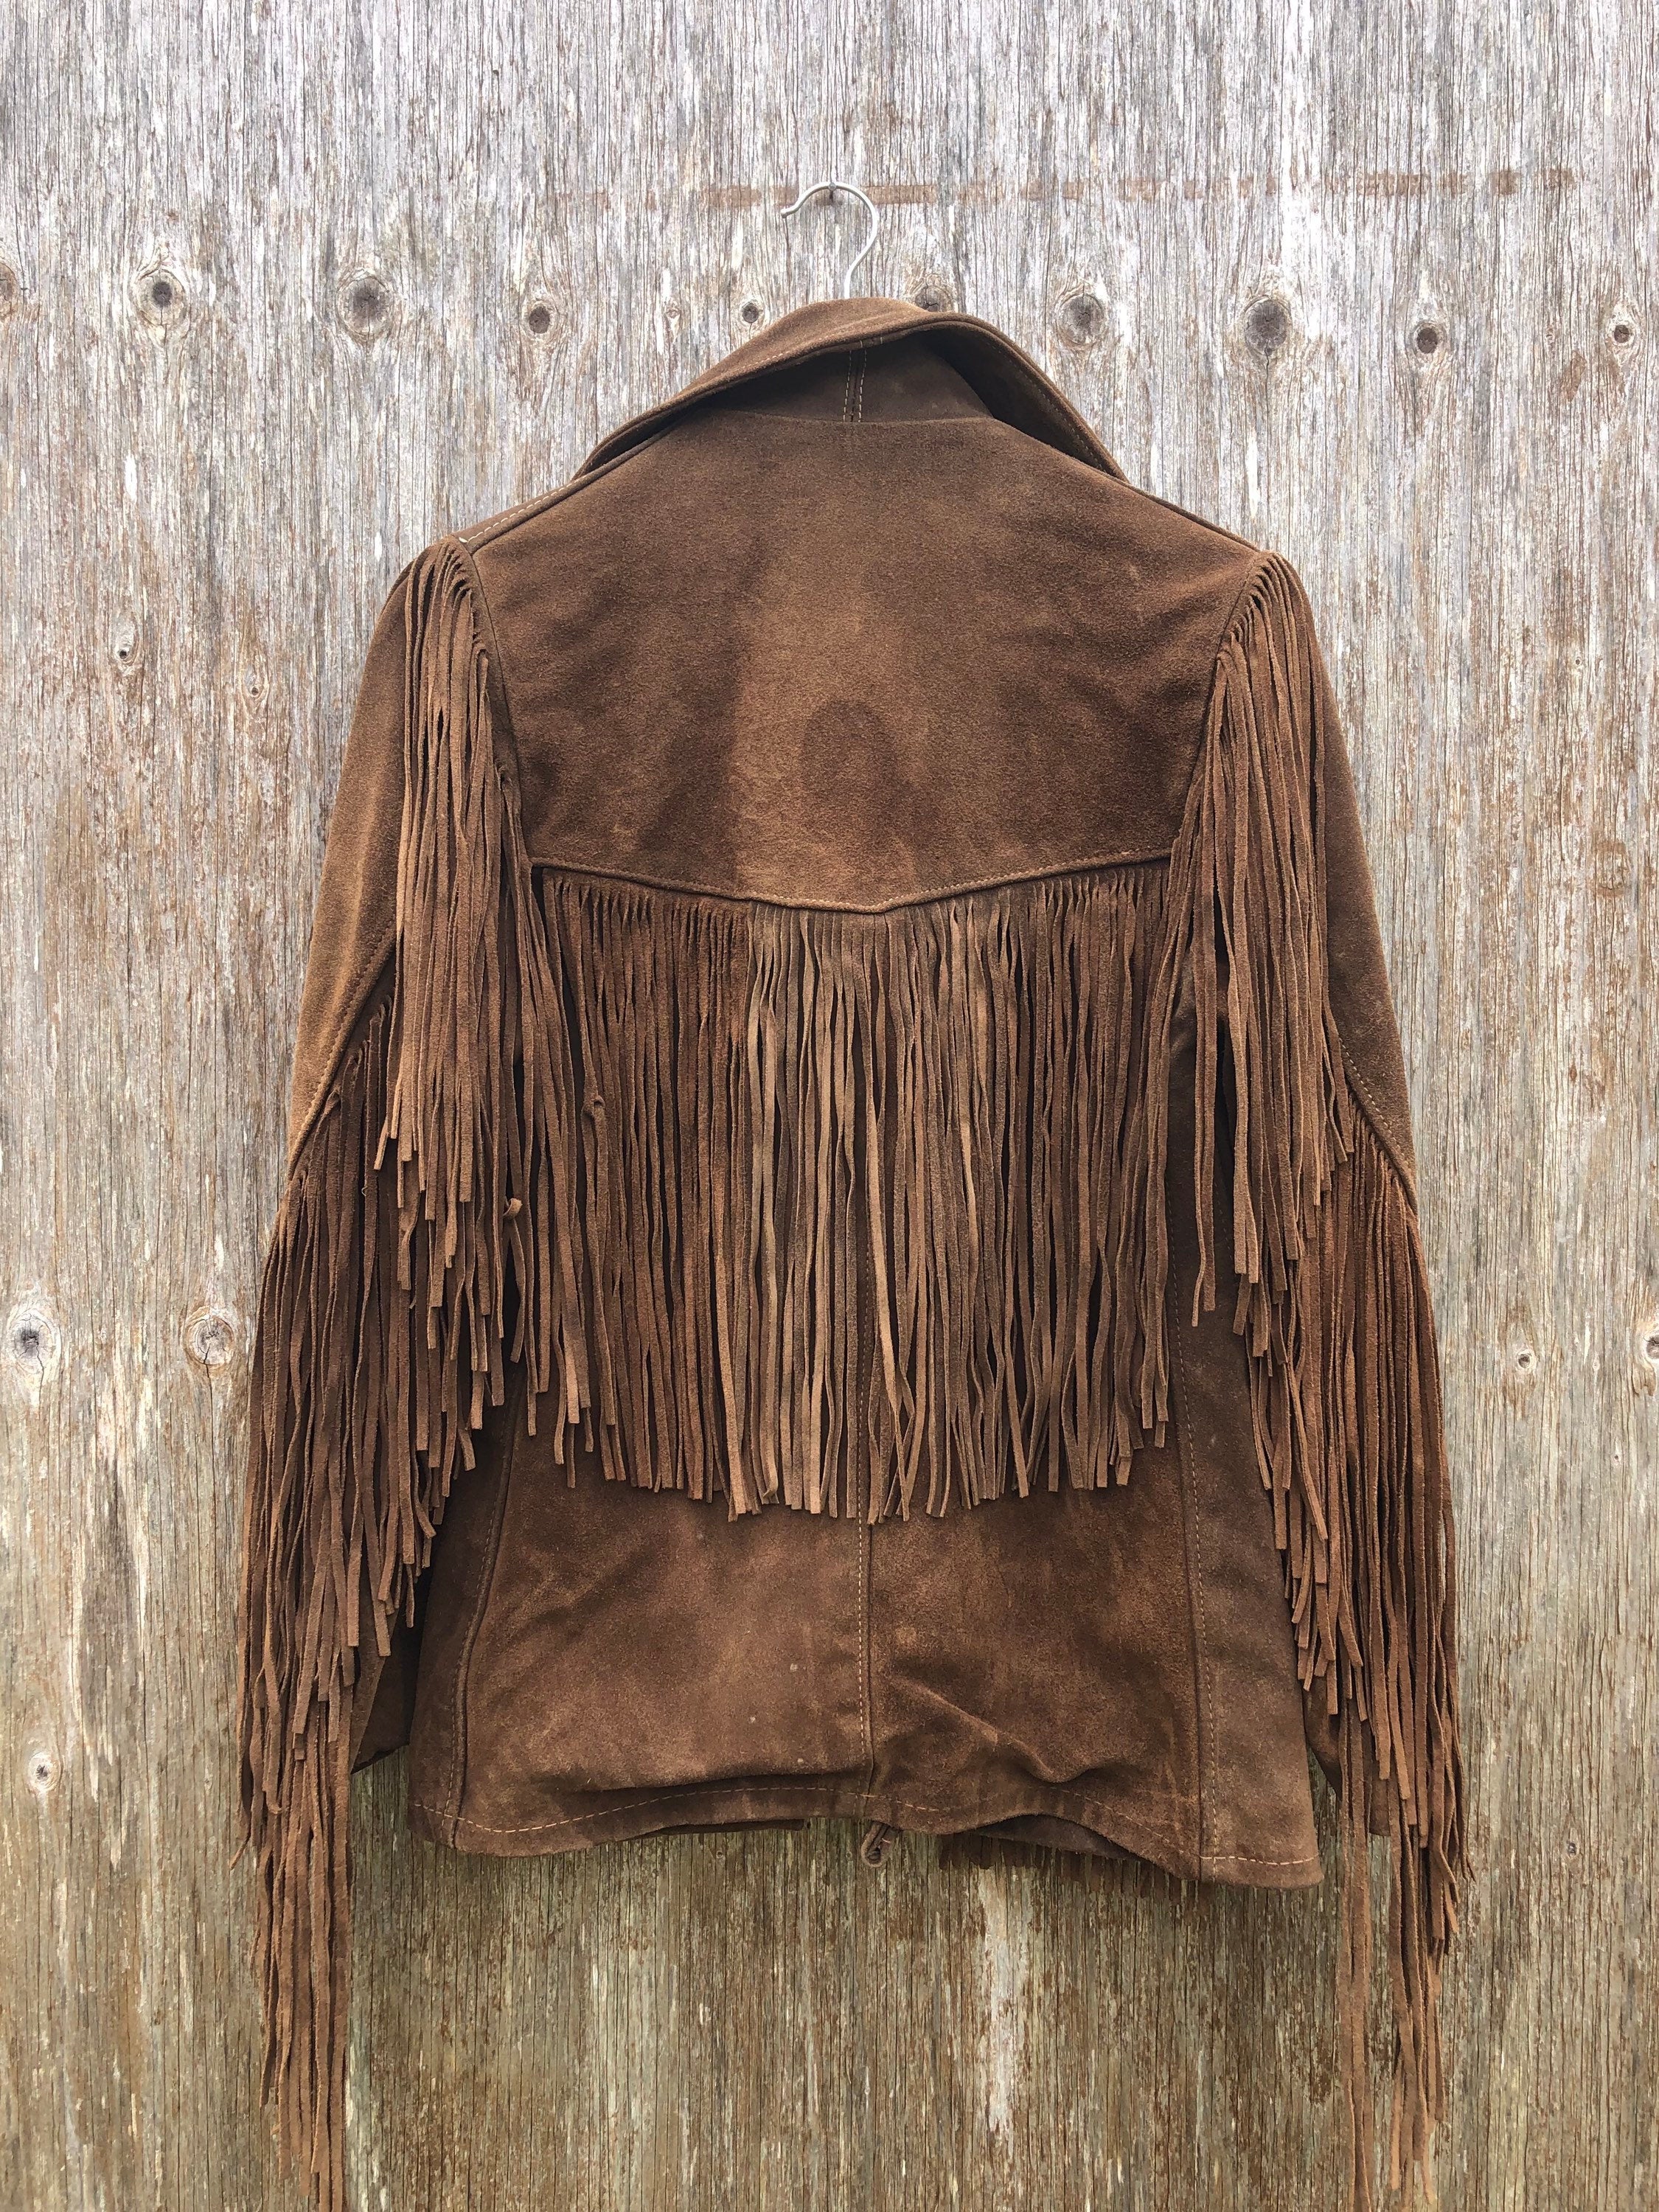 Vintage 70's Western Fringed Leather Jacket by Rancher | Shop THRILLING